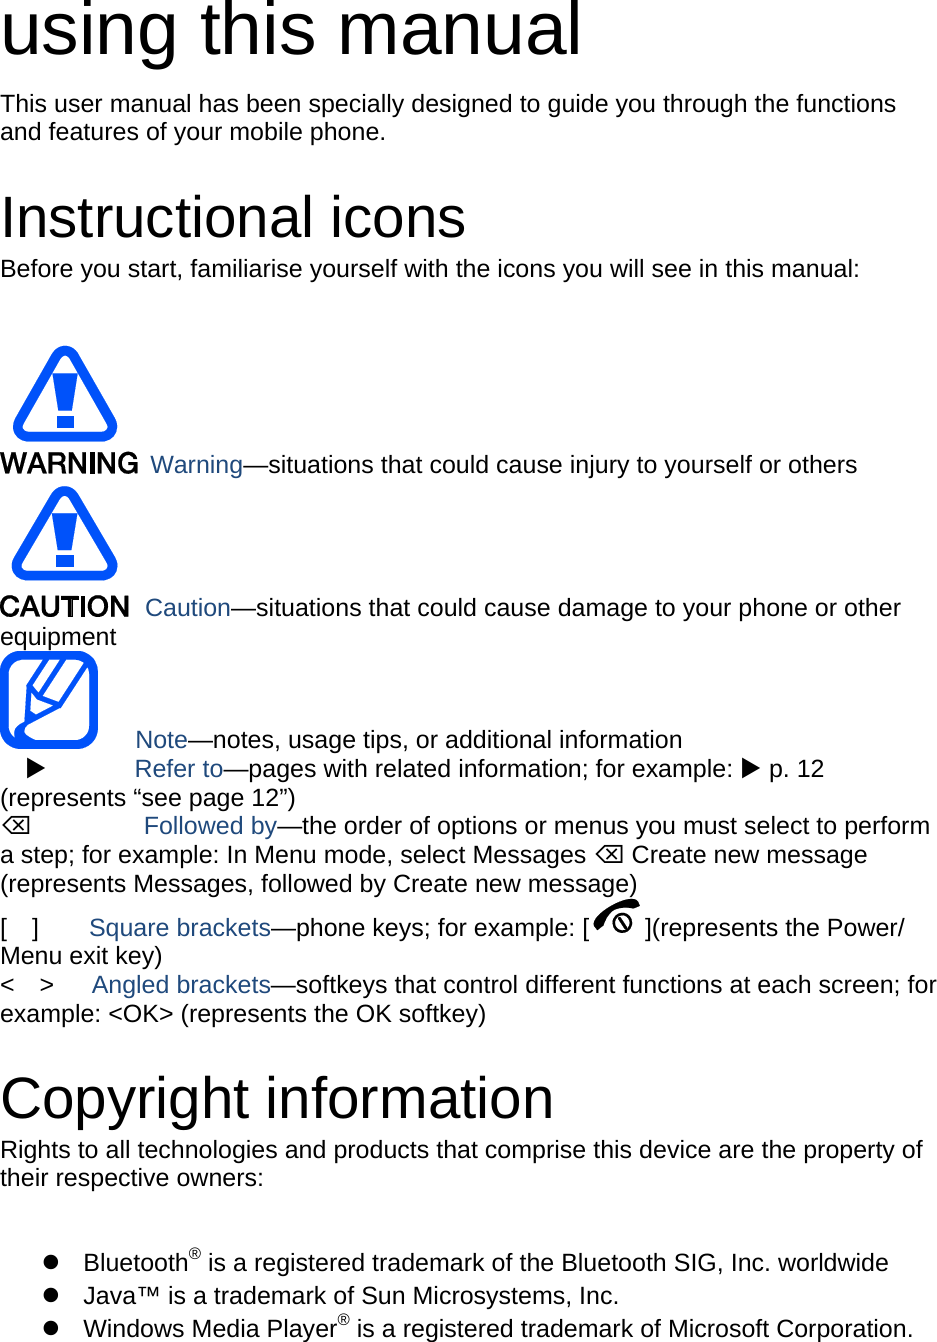 using this manual This user manual has been specially designed to guide you through the functions and features of your mobile phone.  Instructional icons Before you start, familiarise yourself with the icons you will see in this manual:     Warning—situations that could cause injury to yourself or others  Caution—situations that could cause damage to your phone or other equipment    Note—notes, usage tips, or additional information          Refer to—pages with related information; for example:  p. 12 (represents “see page 12”)      Followed by—the order of options or menus you must select to perform a step; for example: In Menu mode, select Messages  Create new message (represents Messages, followed by Create new message) [  ]    Square brackets—phone keys; for example: [ ](represents the Power/ Menu exit key) &lt;  &gt;   Angled brackets—softkeys that control different functions at each screen; for example: &lt;OK&gt; (represents the OK softkey)  Copyright information Rights to all technologies and products that comprise this device are the property of their respective owners:   Bluetooth® is a registered trademark of the Bluetooth SIG, Inc. worldwide   Java™ is a trademark of Sun Microsystems, Inc.  Windows Media Player® is a registered trademark of Microsoft Corporation.  